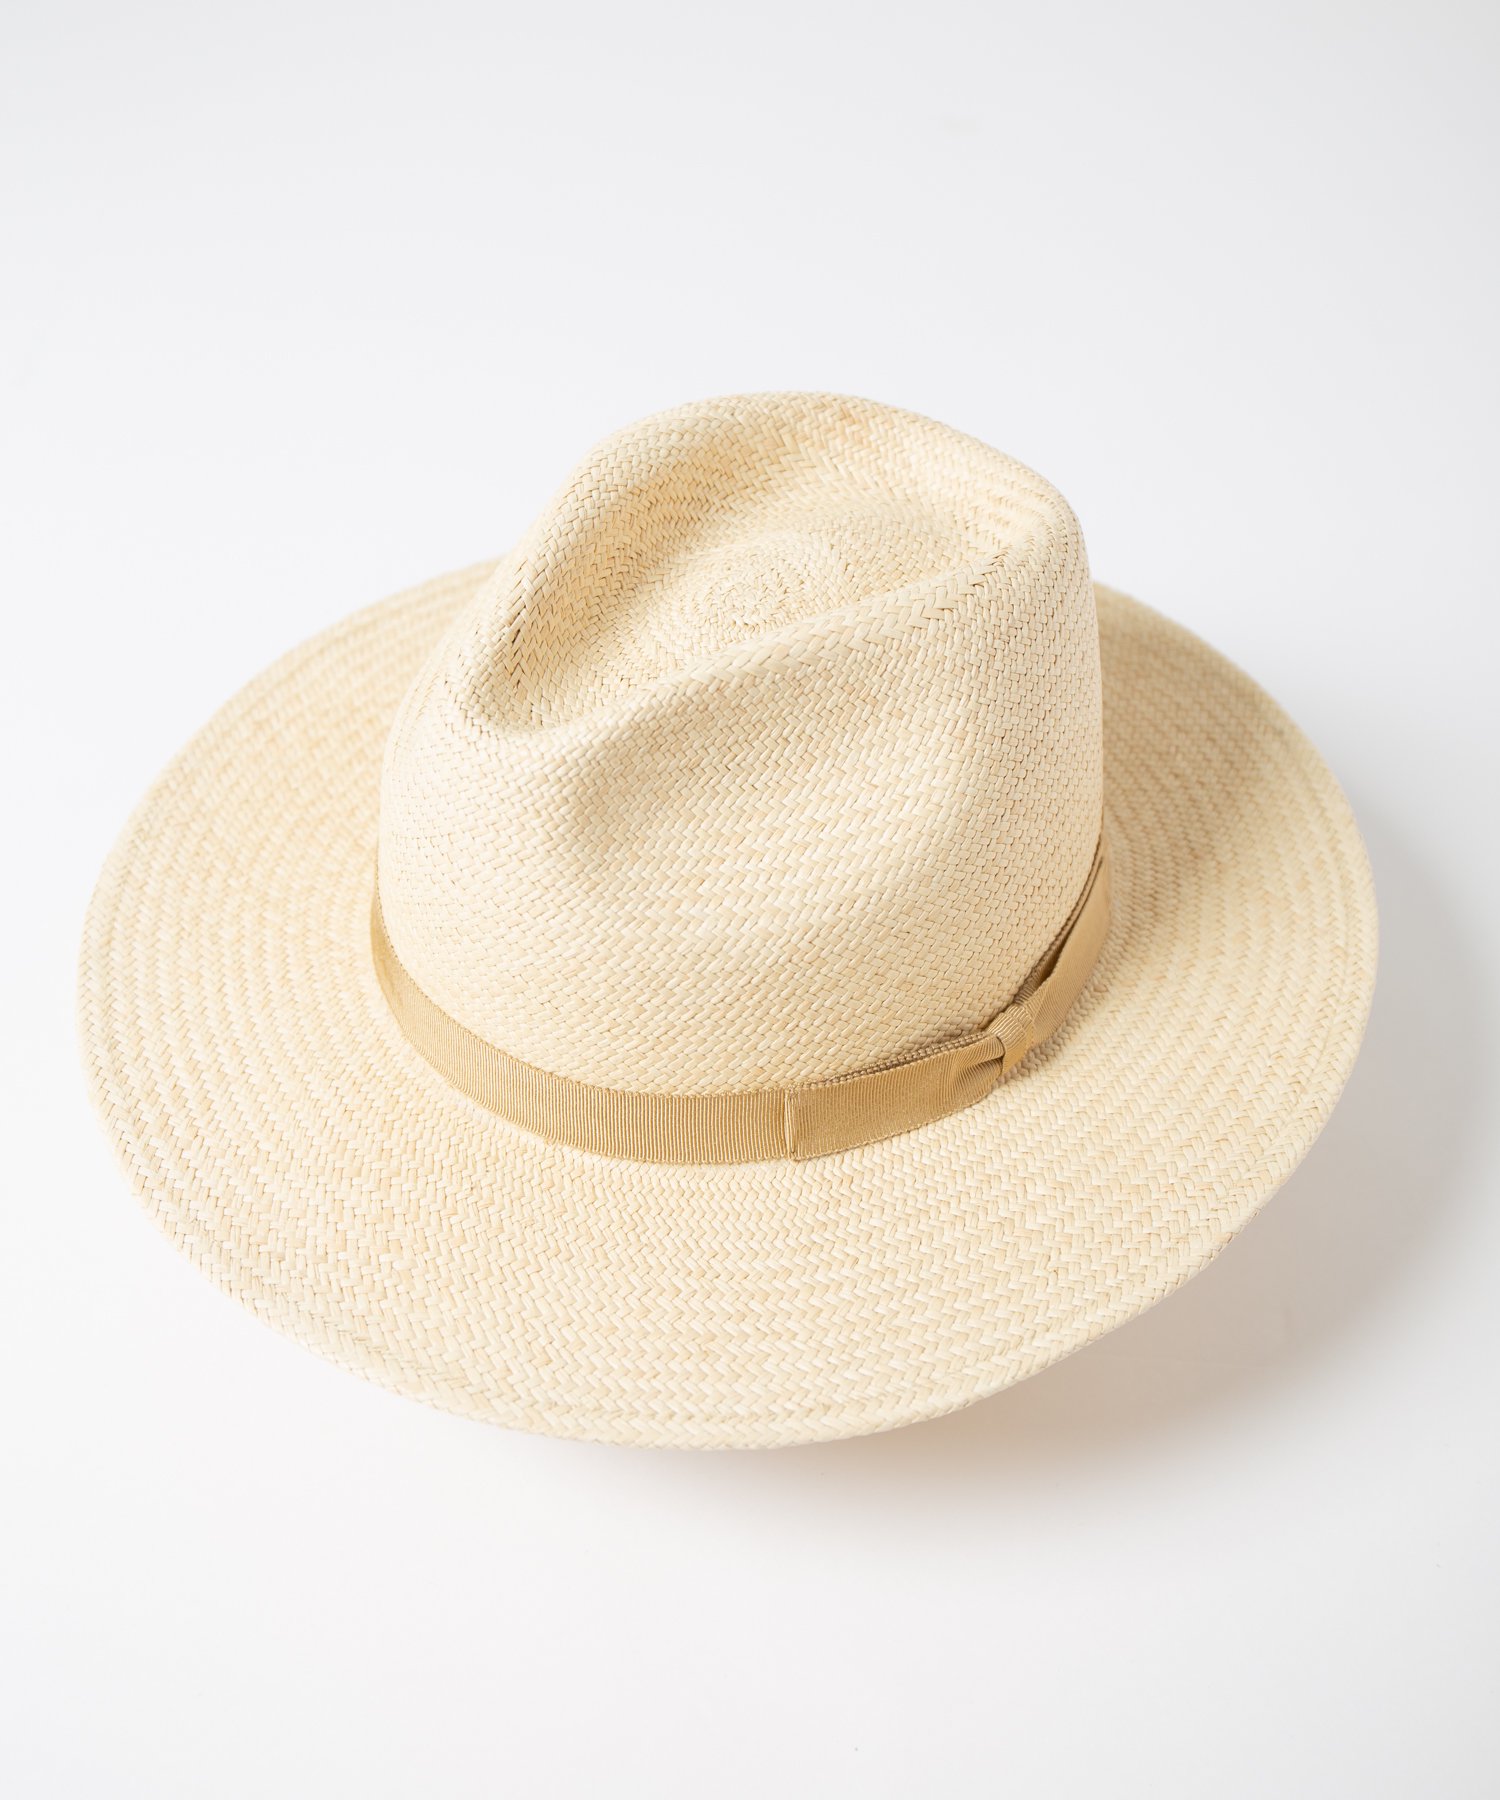 <img class='new_mark_img1' src='https://img.shop-pro.jp/img/new/icons15.gif' style='border:none;display:inline;margin:0px;padding:0px;width:auto;' />【Racal】 Panama hat / パナマハット